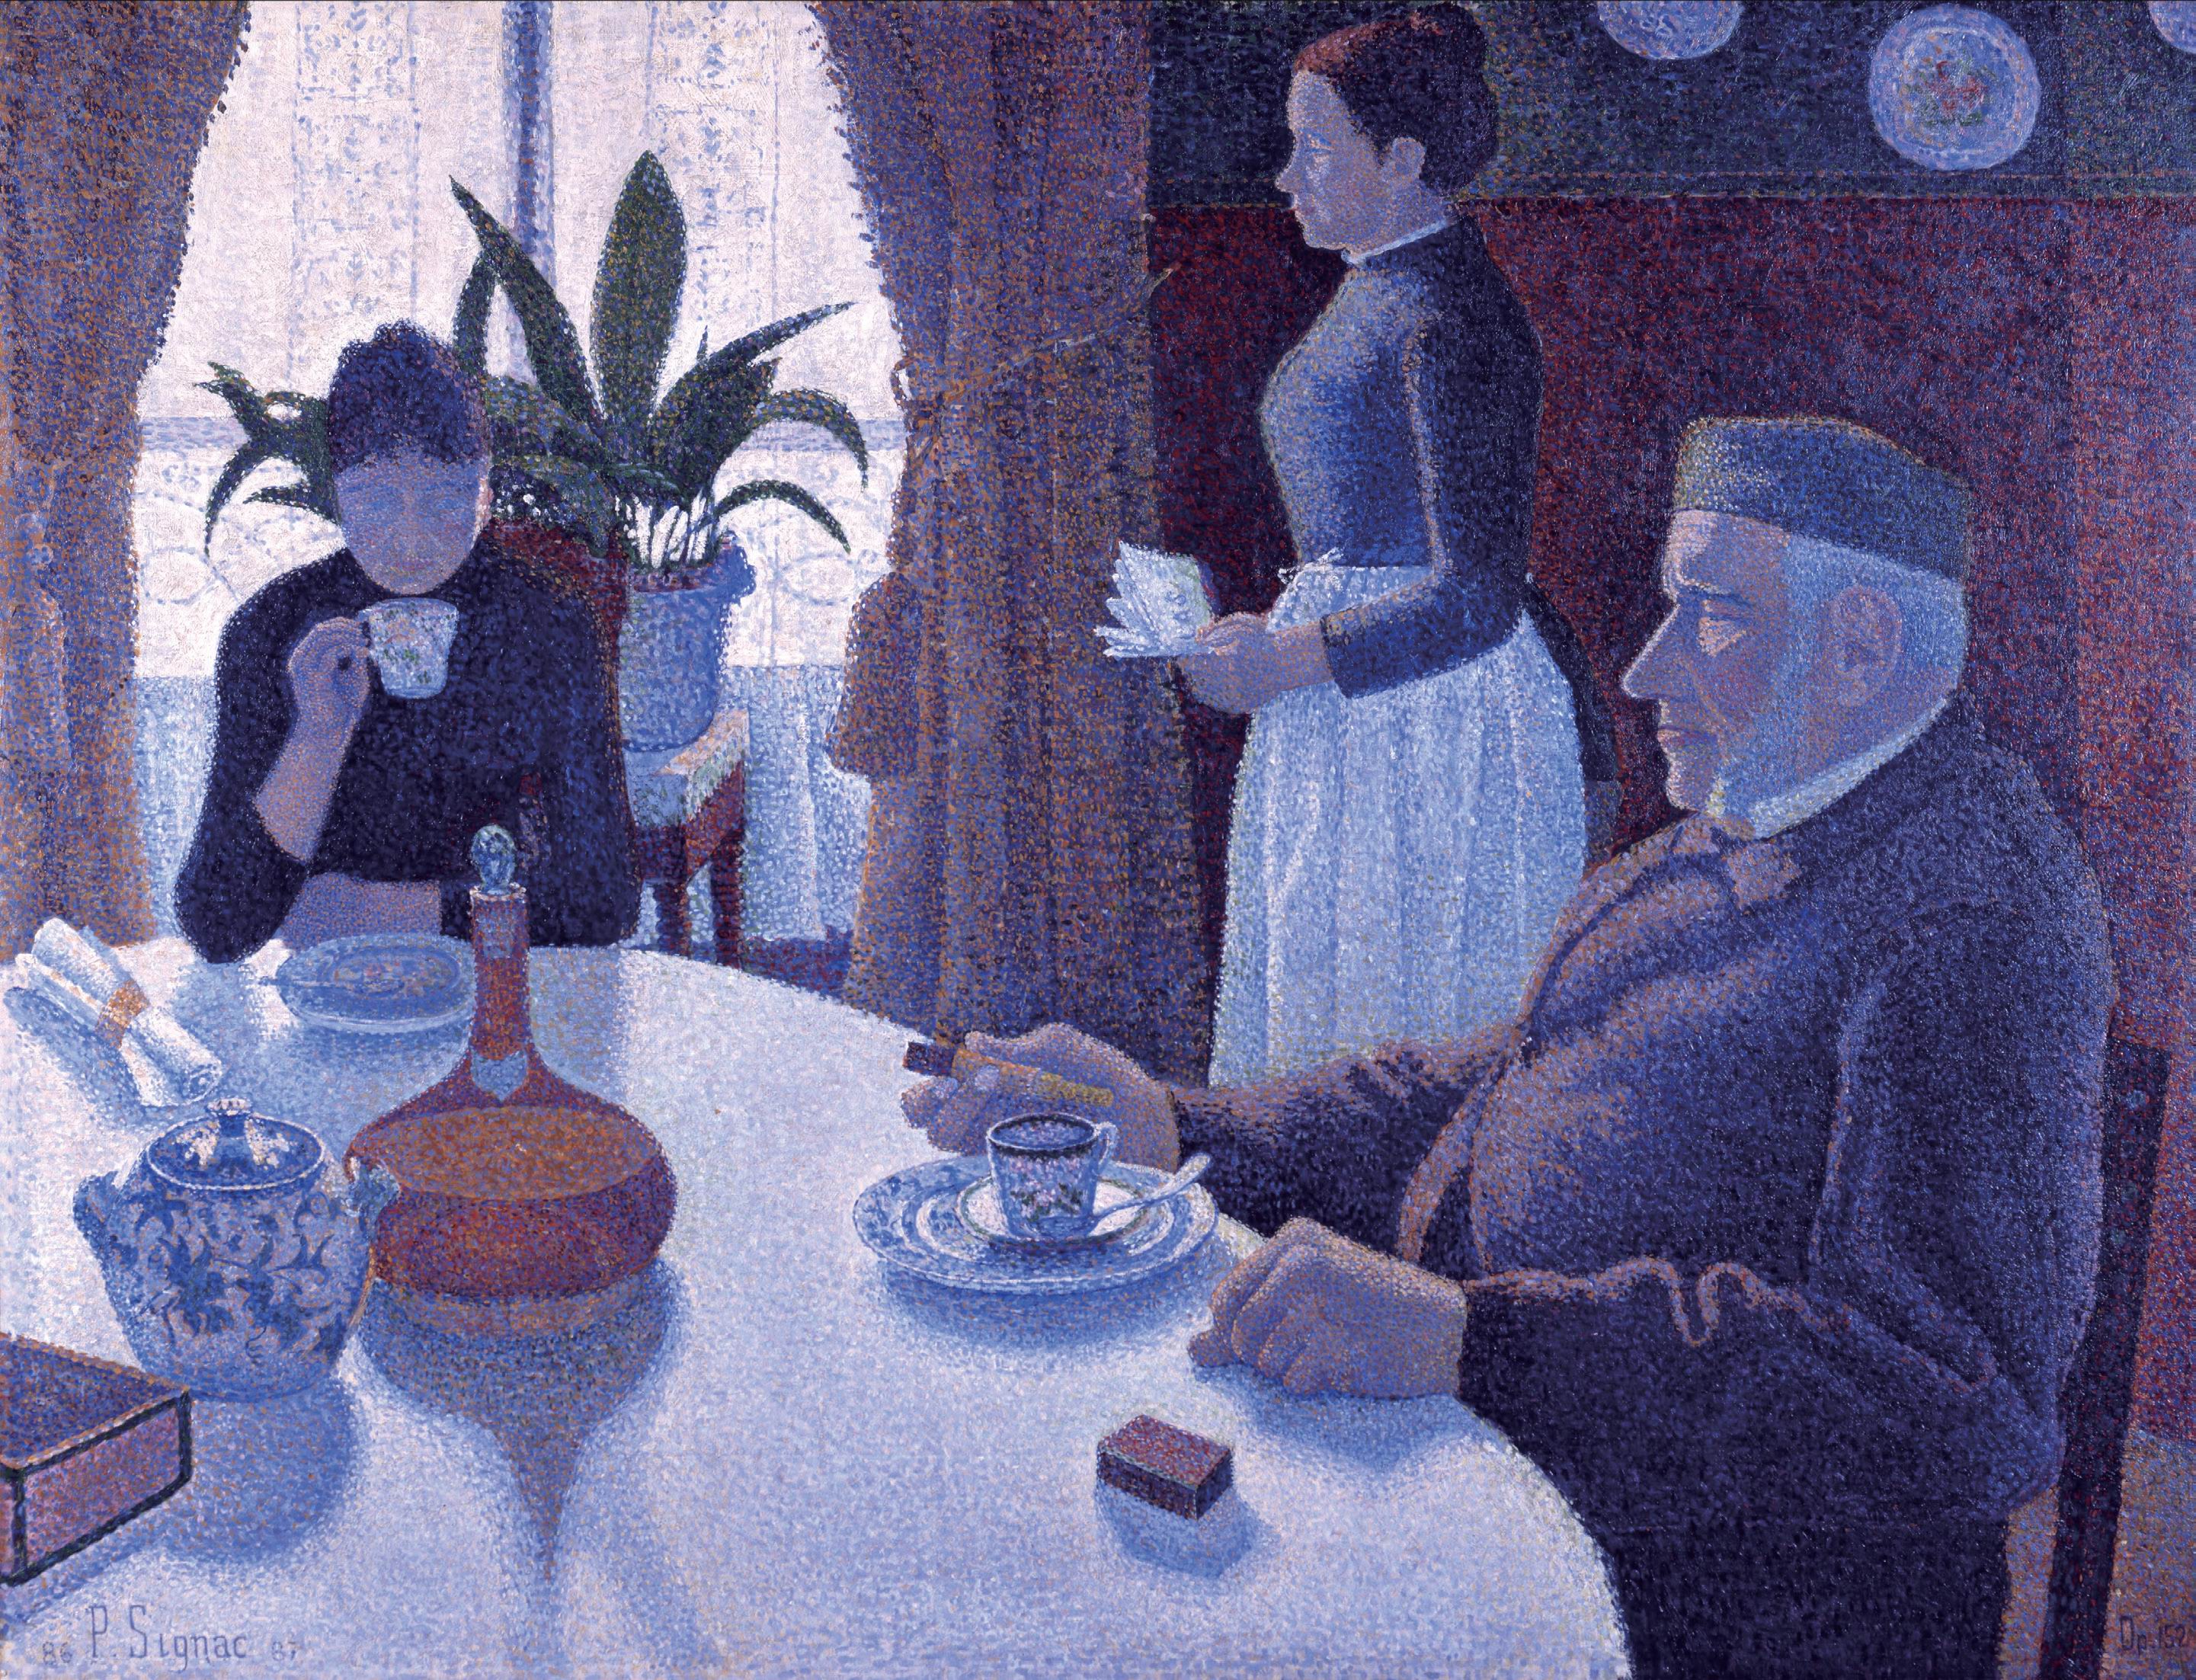 General 2882x2205 Oil on canvas oil painting Paul Signac sitting artwork classic art table cup maid plants window curtains plates dining room men women digital art watermarked